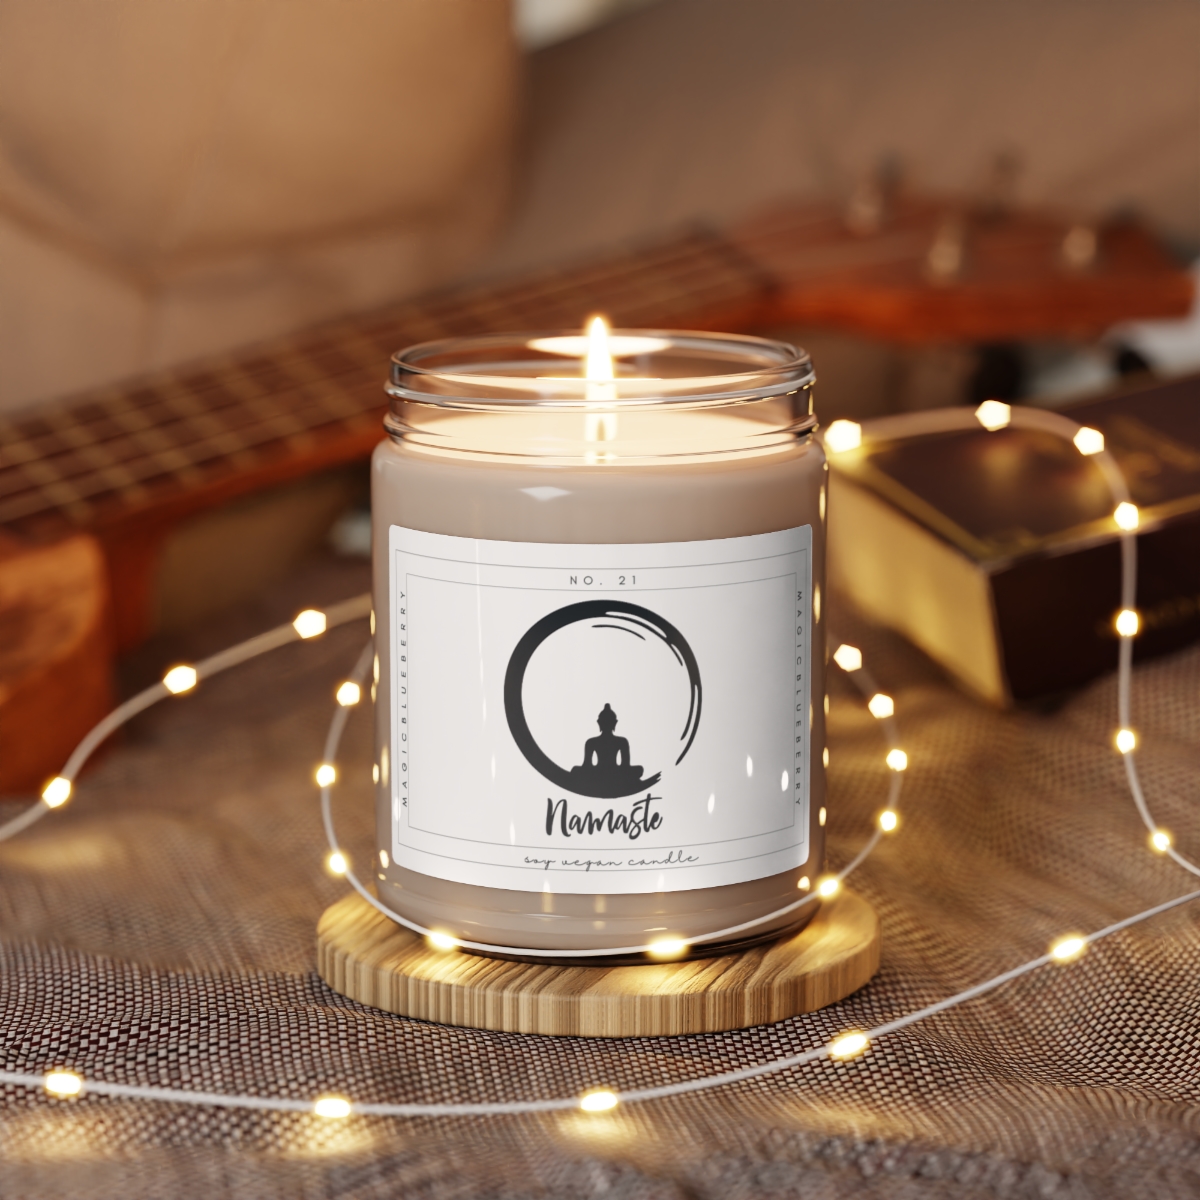 Namaste - Scented Vegan Soy Wax Candle Clear Jar Candle, Spell Candle, Sassy Candle Vegan Candle Cotton Wick Candle Home Deco product main image